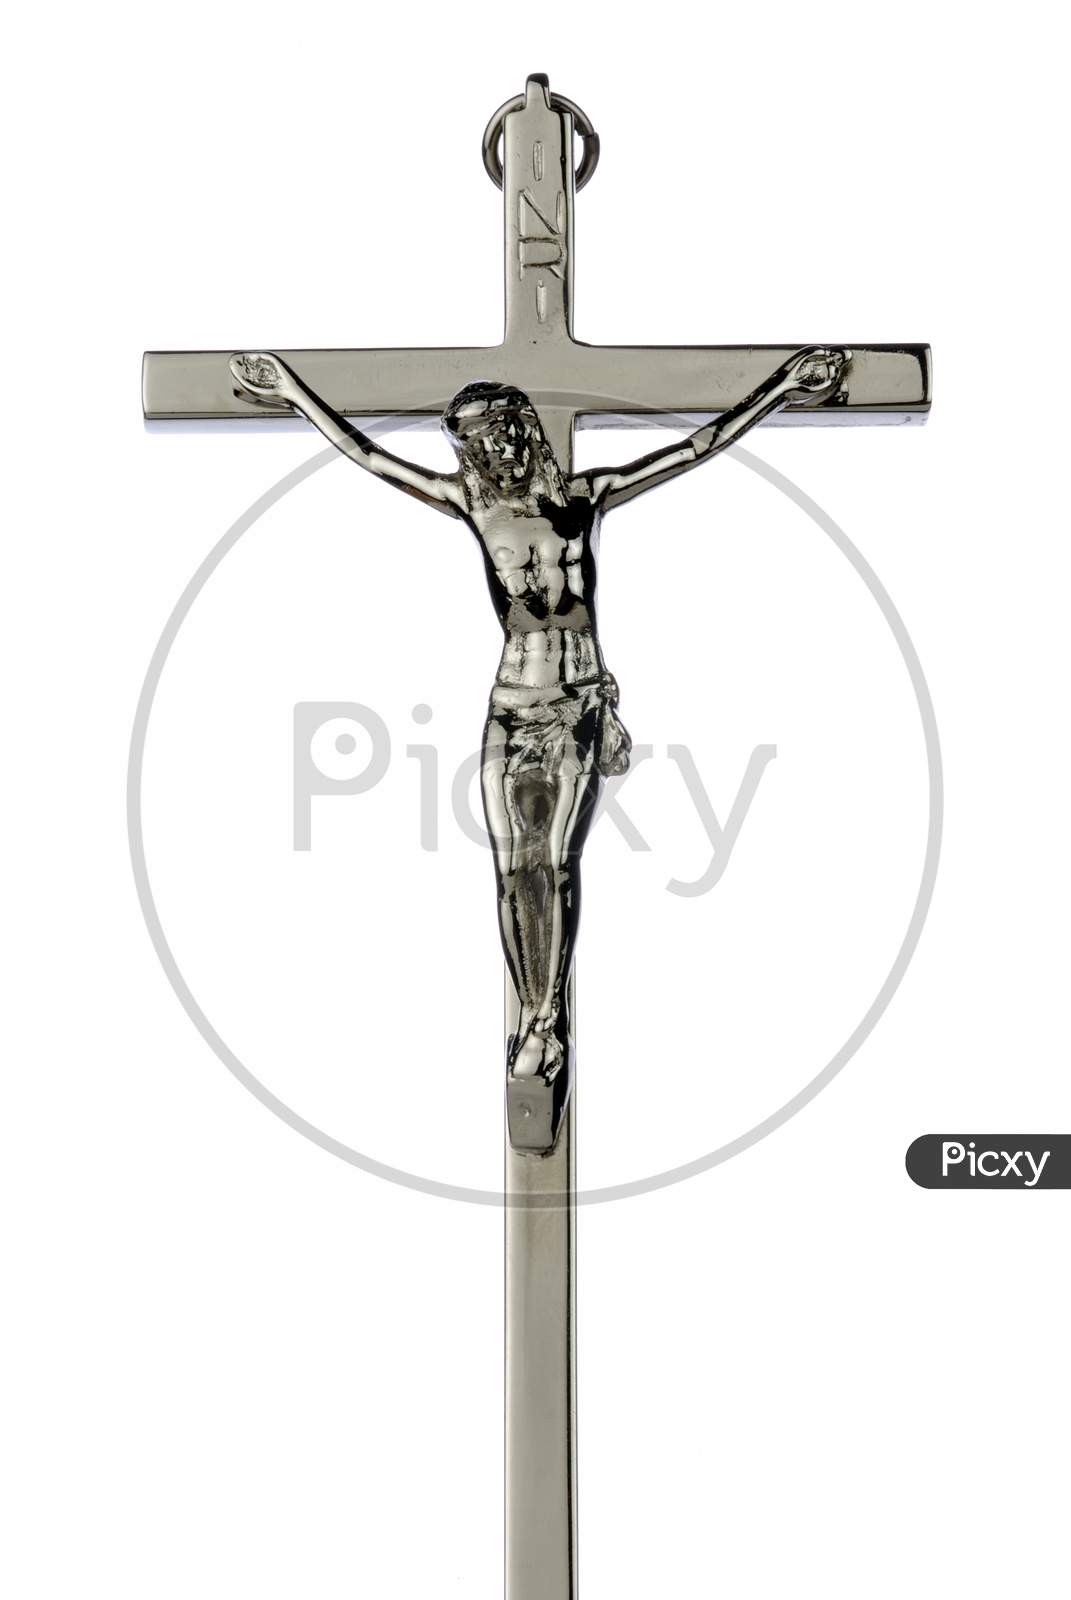 Image Of Steel Key Chain Of Christ Crucification Yc Picxy